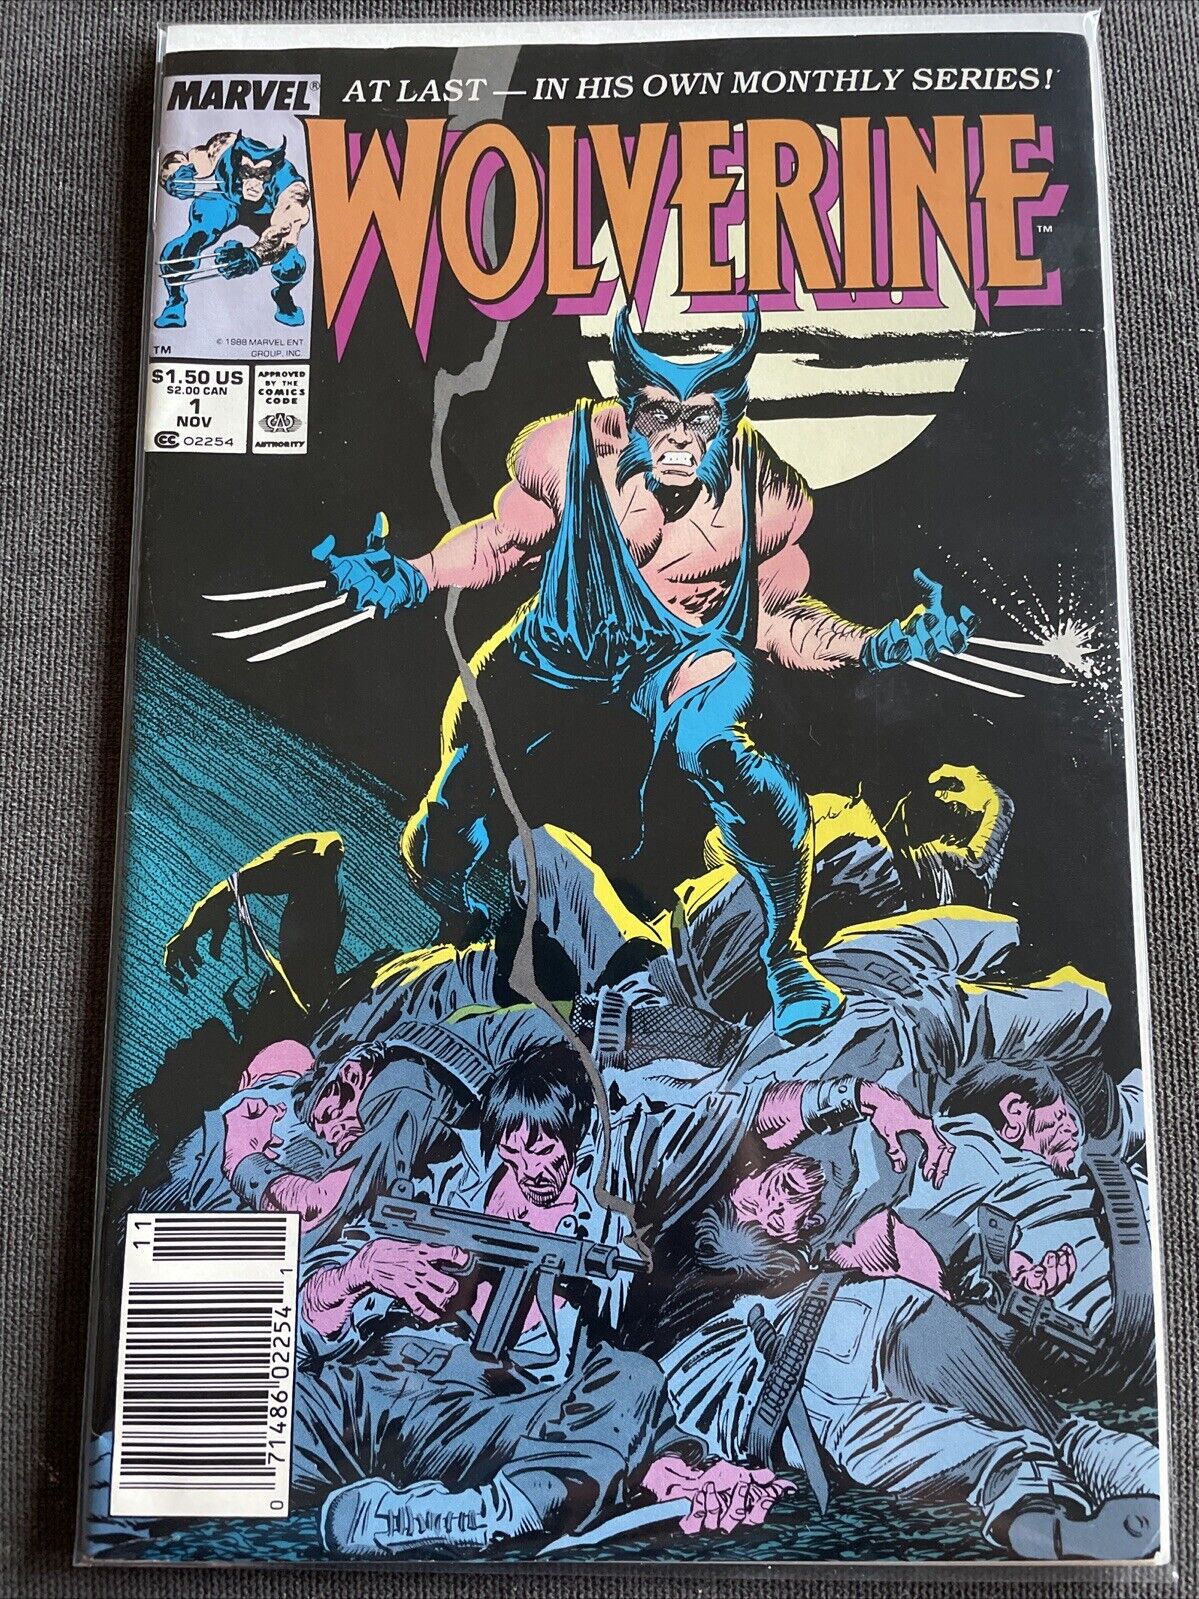 Marvel -  WOLVERINE #1 NEWSSTAND (Good Condition) bagged and boarded